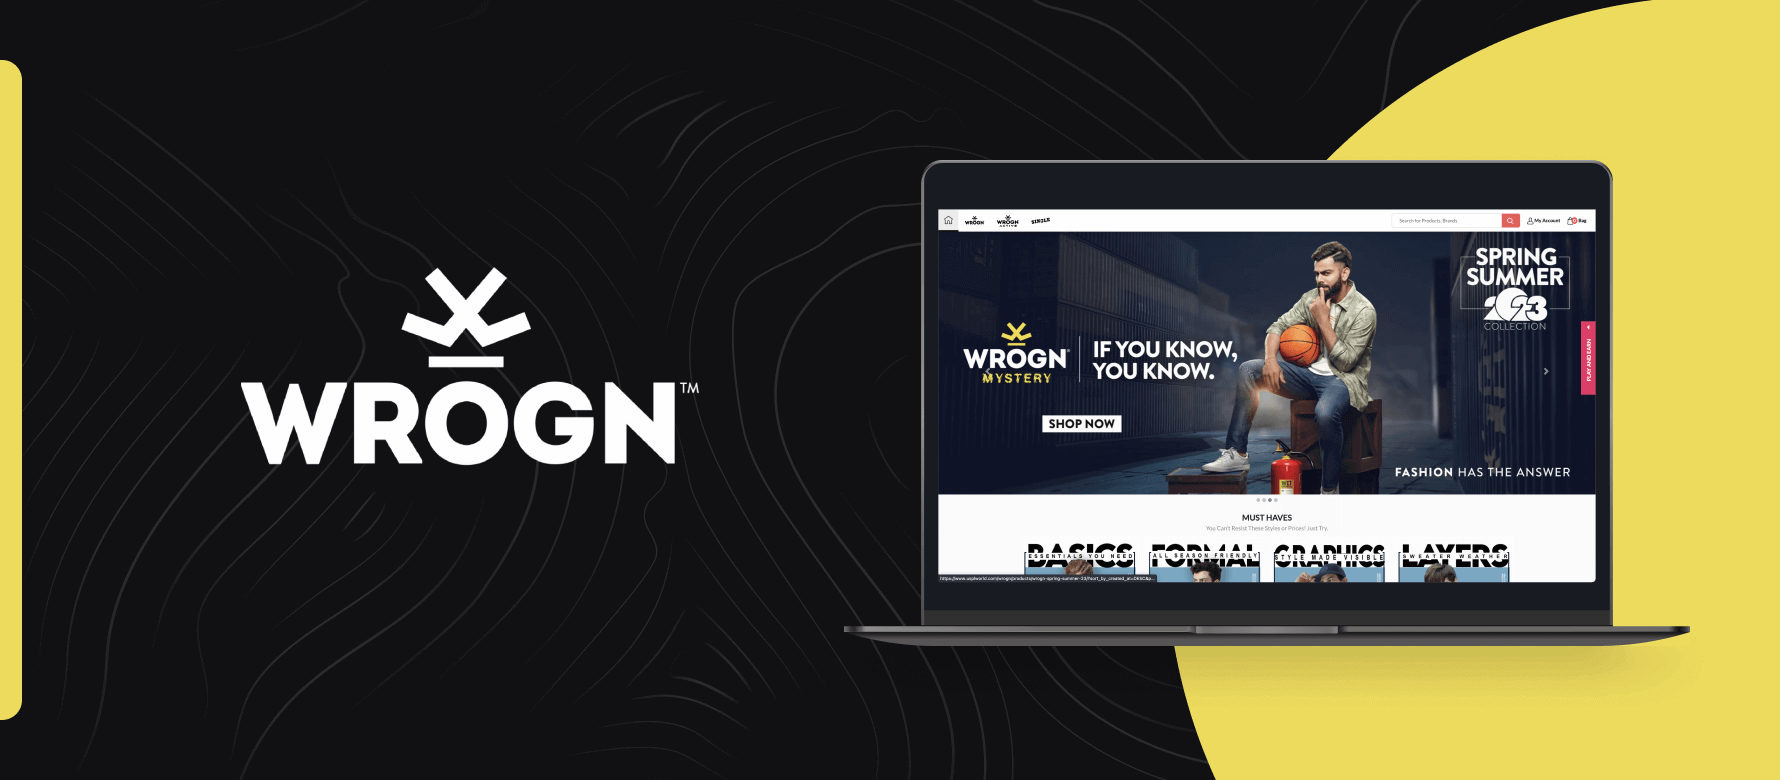 Case Study | Home page design of Wrogn, E-Commerce based premium fashion brand from India